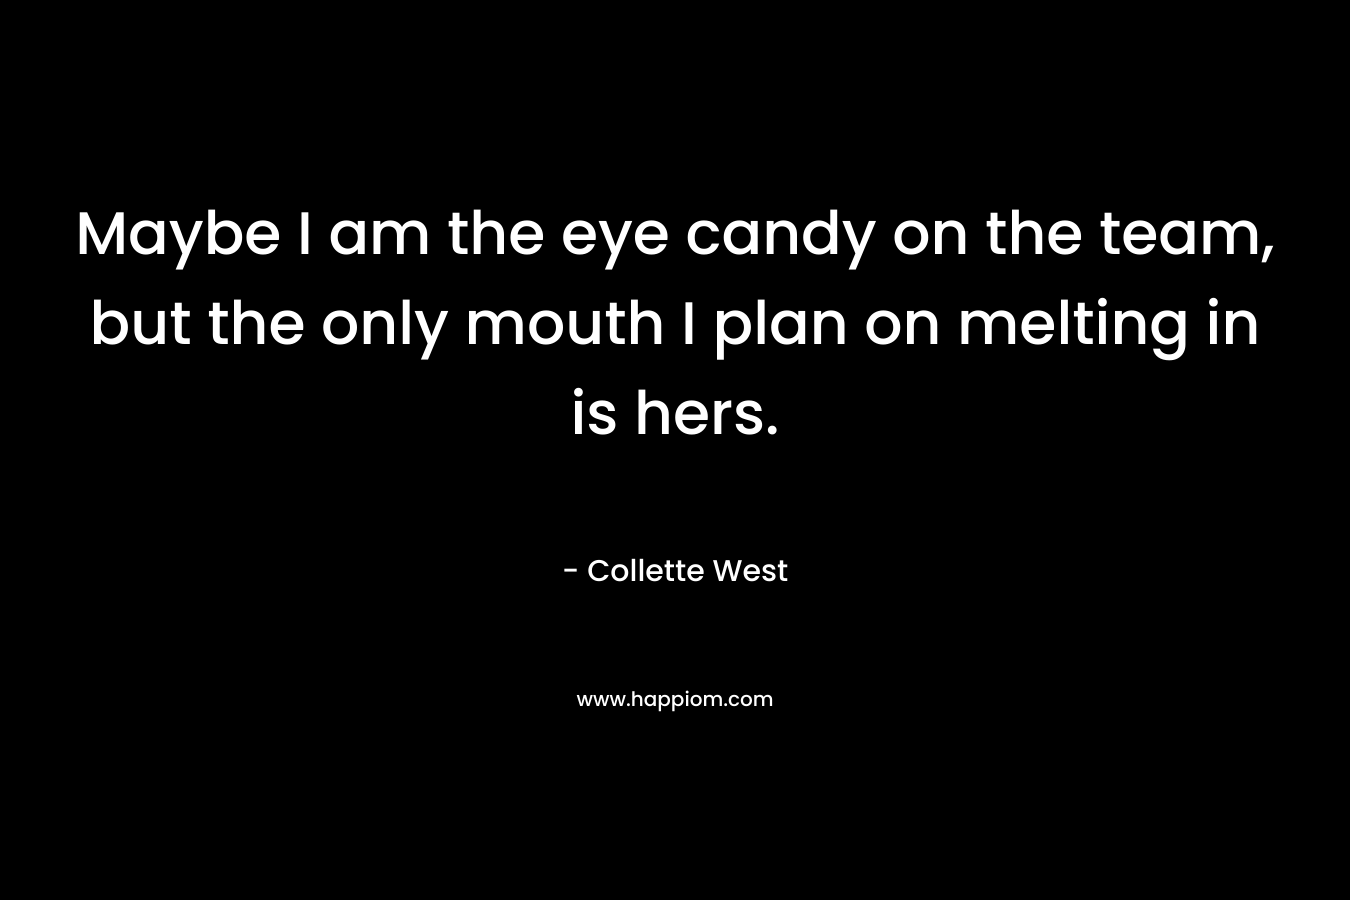 Maybe I am the eye candy on the team, but the only mouth I plan on melting in is hers. – Collette West